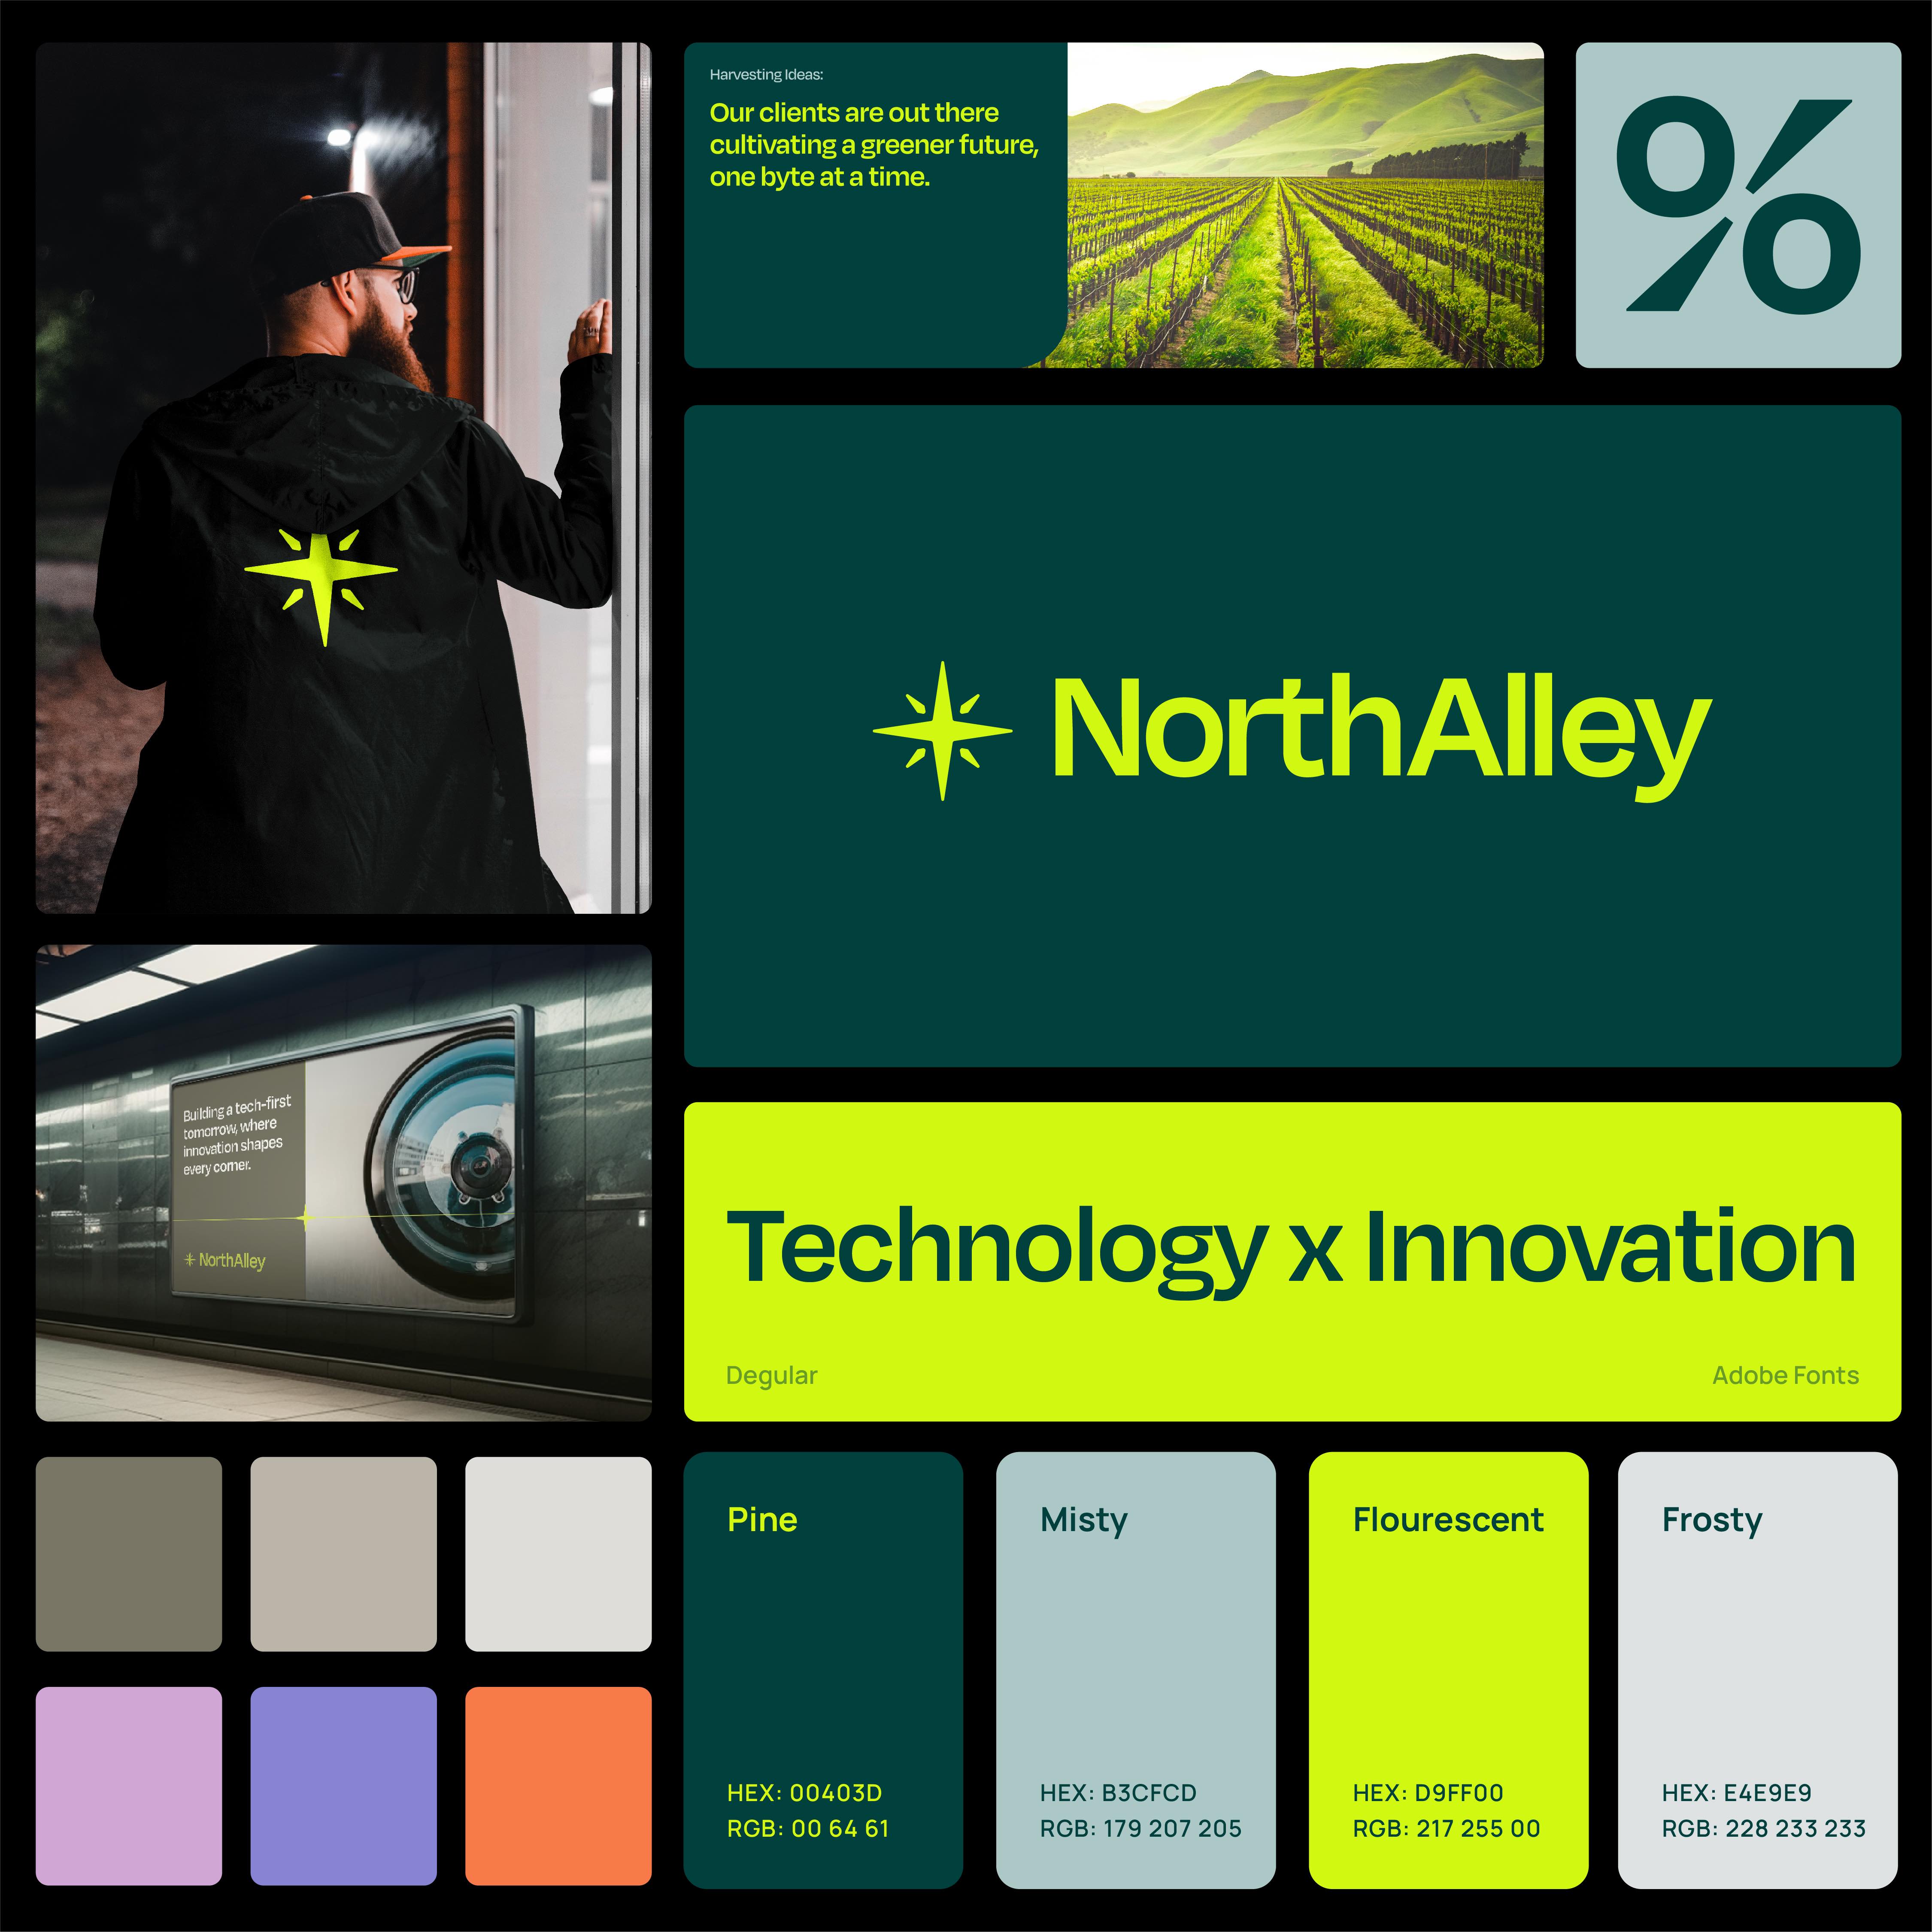 NorthAlley’s Brand Transformation by Studio Fable Showcases Innovation and Customer Focus